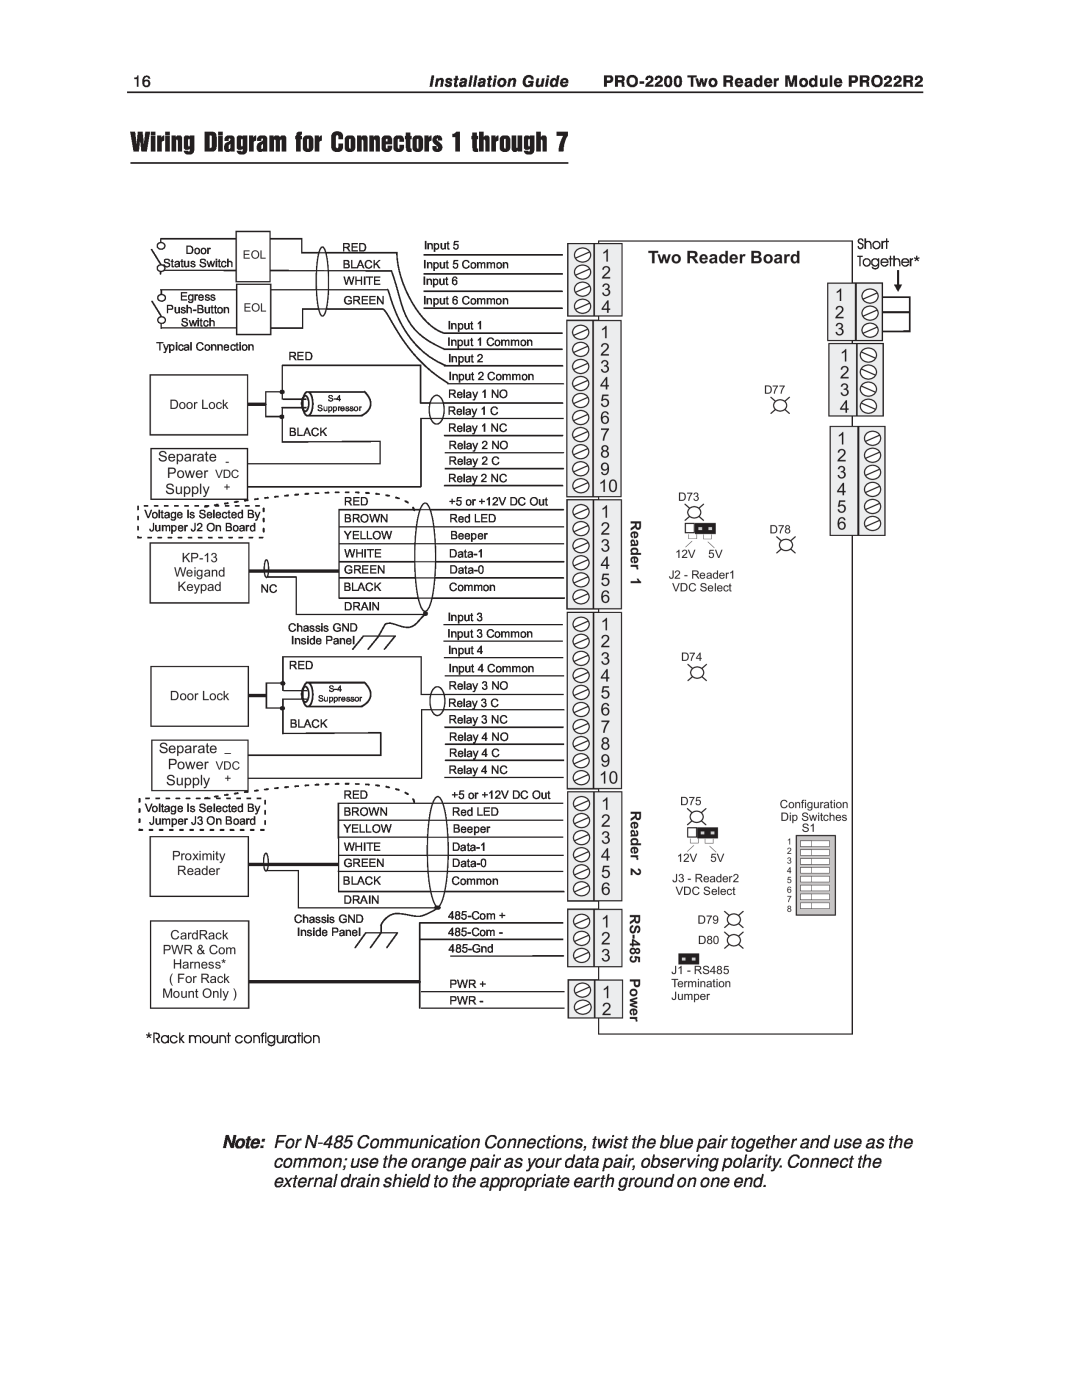 Honeywell PRO-2200 Wiring Diagram for Connectors 1 through, 1 2 3 4 1 2 3 4 5 6 7 8 9 1 2, Two Reader Board, Separate 